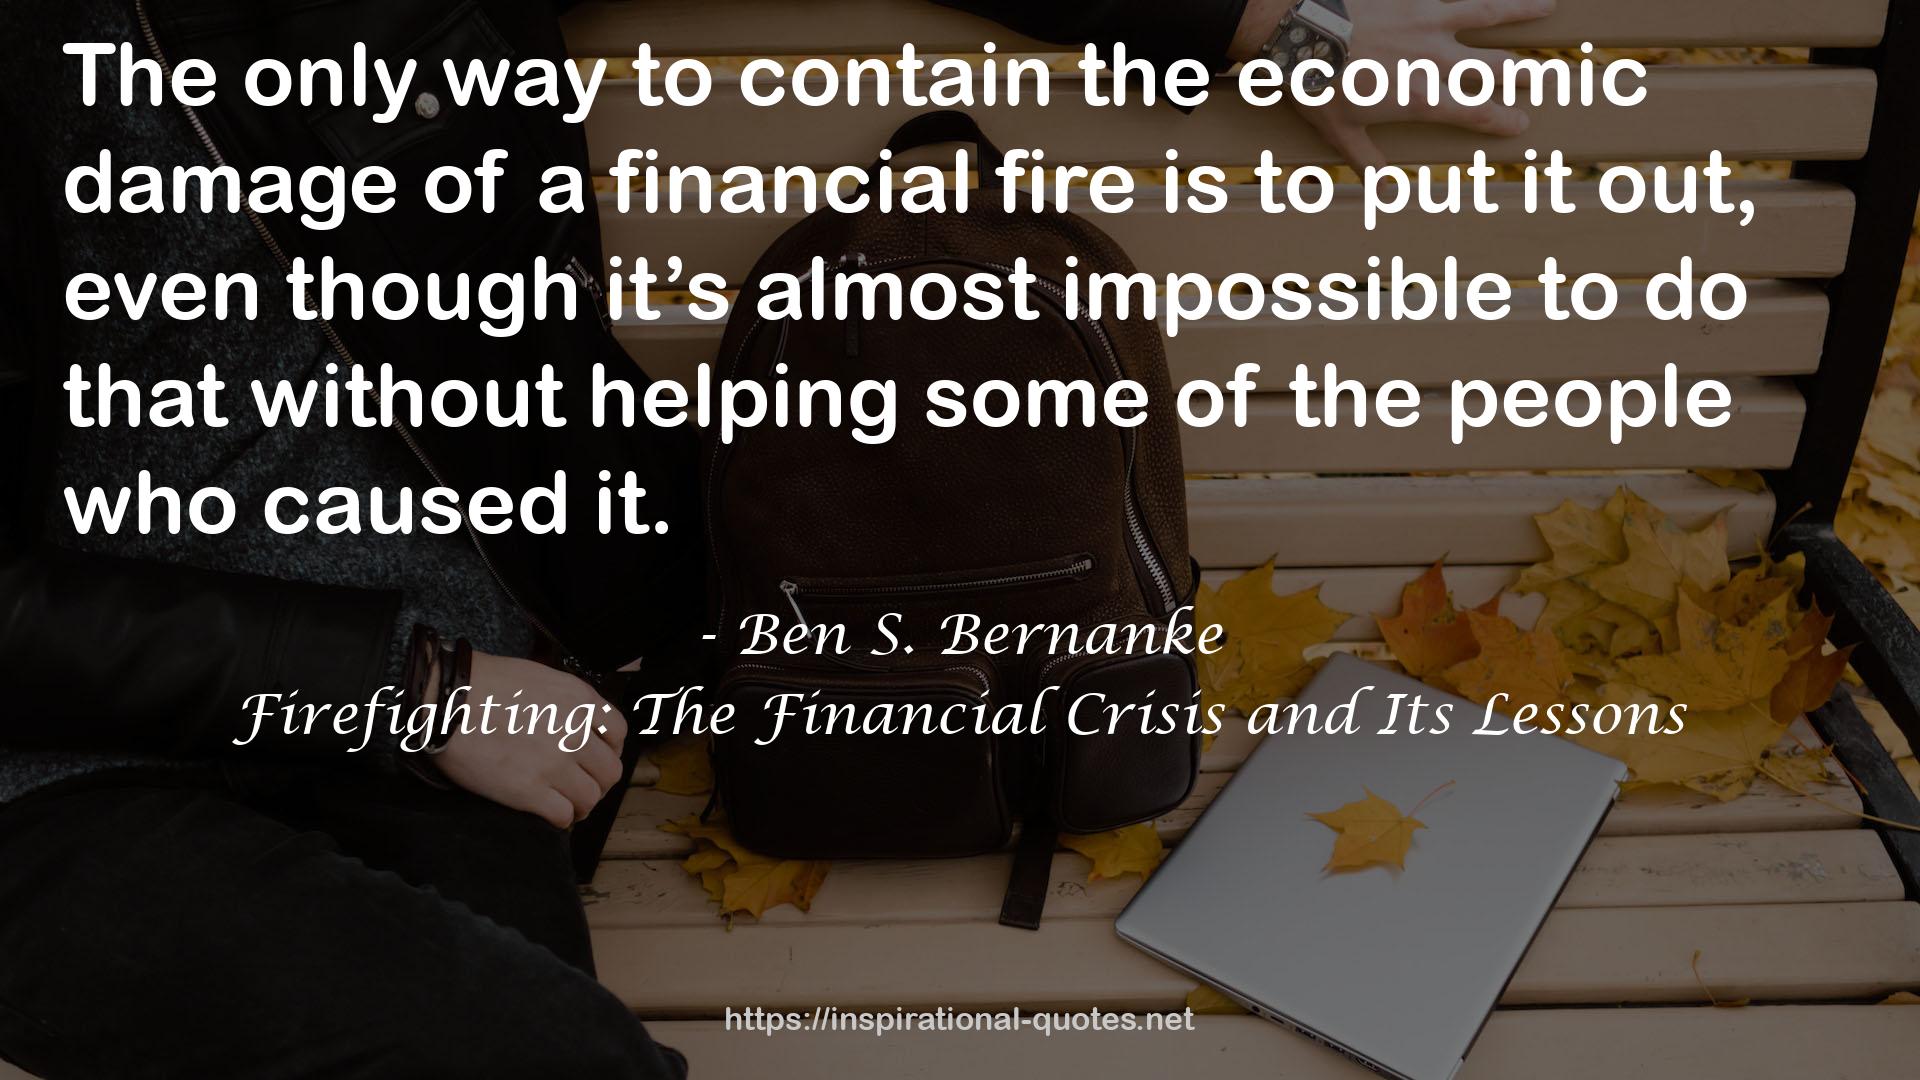 Firefighting: The Financial Crisis and Its Lessons QUOTES